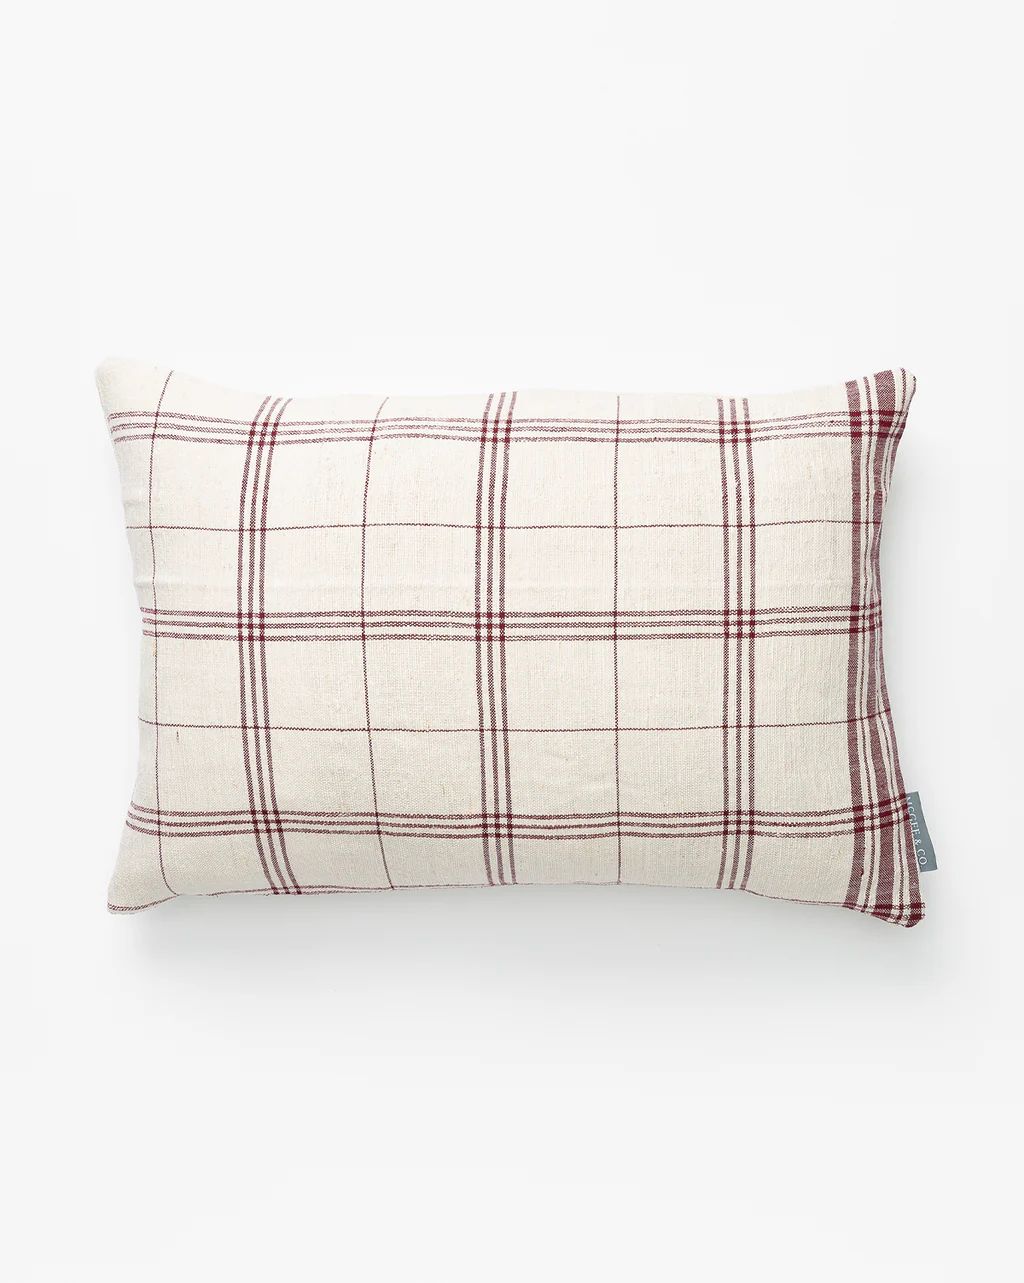 Vintage Plaid Pillow Cover No. 2 | McGee & Co.